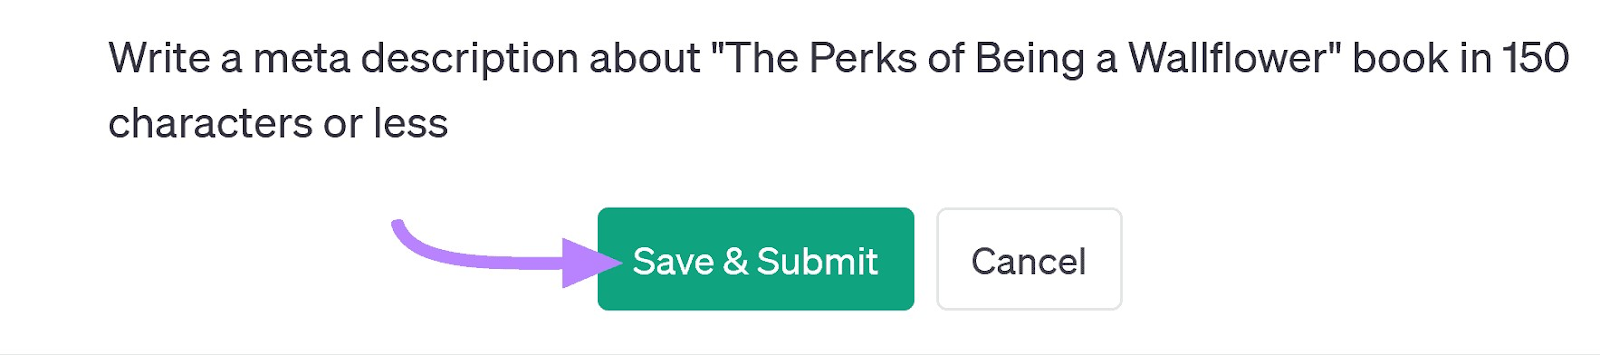 "Save & Submit " button highlighted